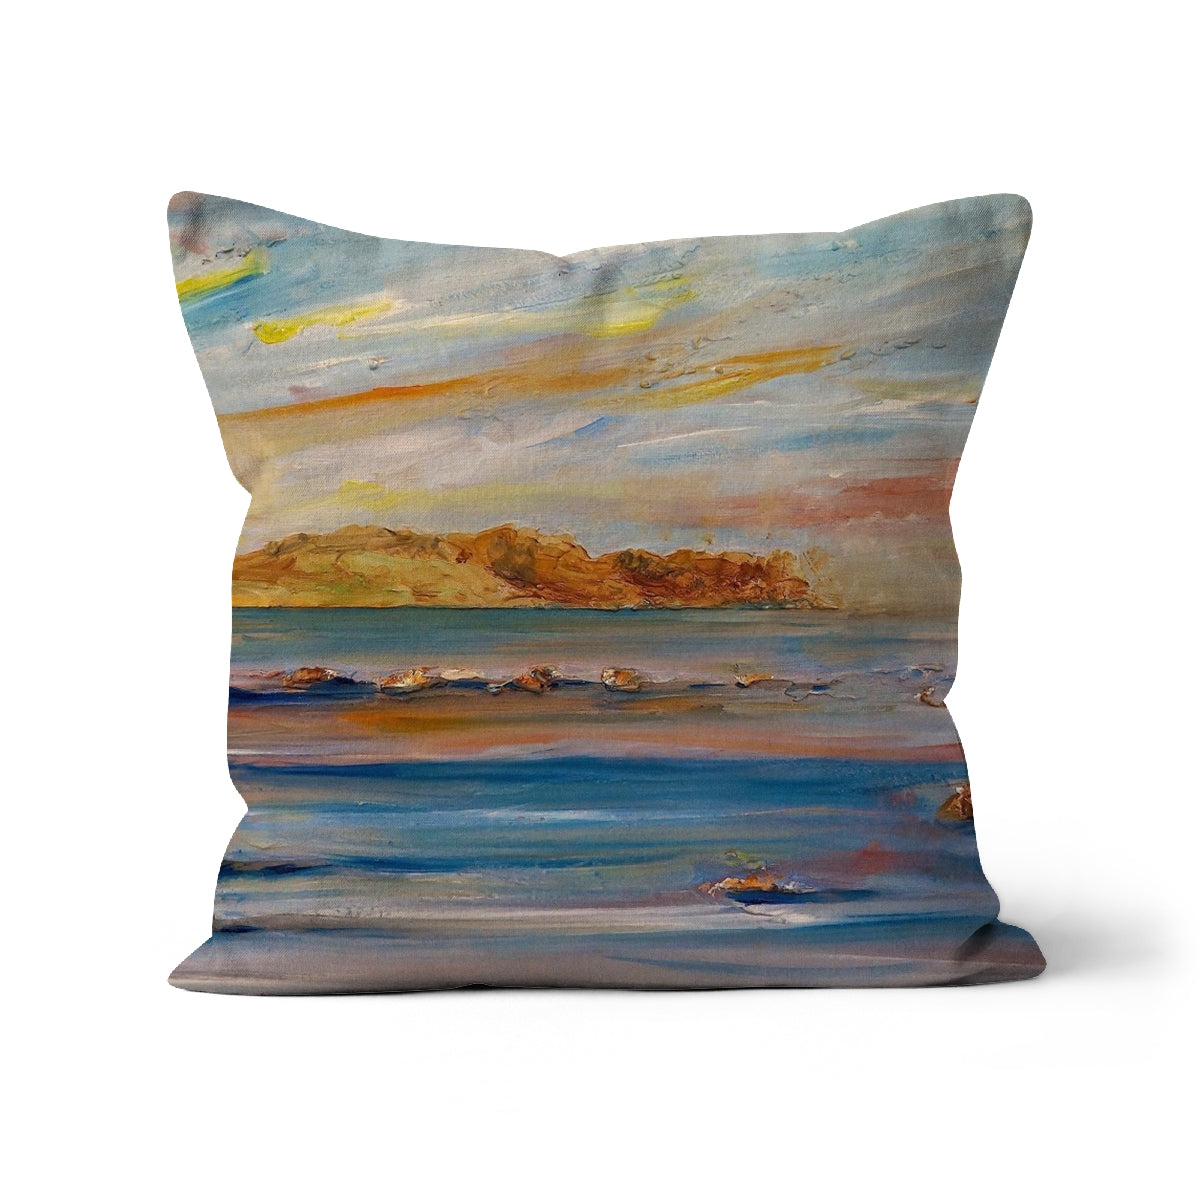 Tiree Dawn Art Gifts Cushion-Cushions-Hebridean Islands Art Gallery-Linen-24"x24"-Paintings, Prints, Homeware, Art Gifts From Scotland By Scottish Artist Kevin Hunter